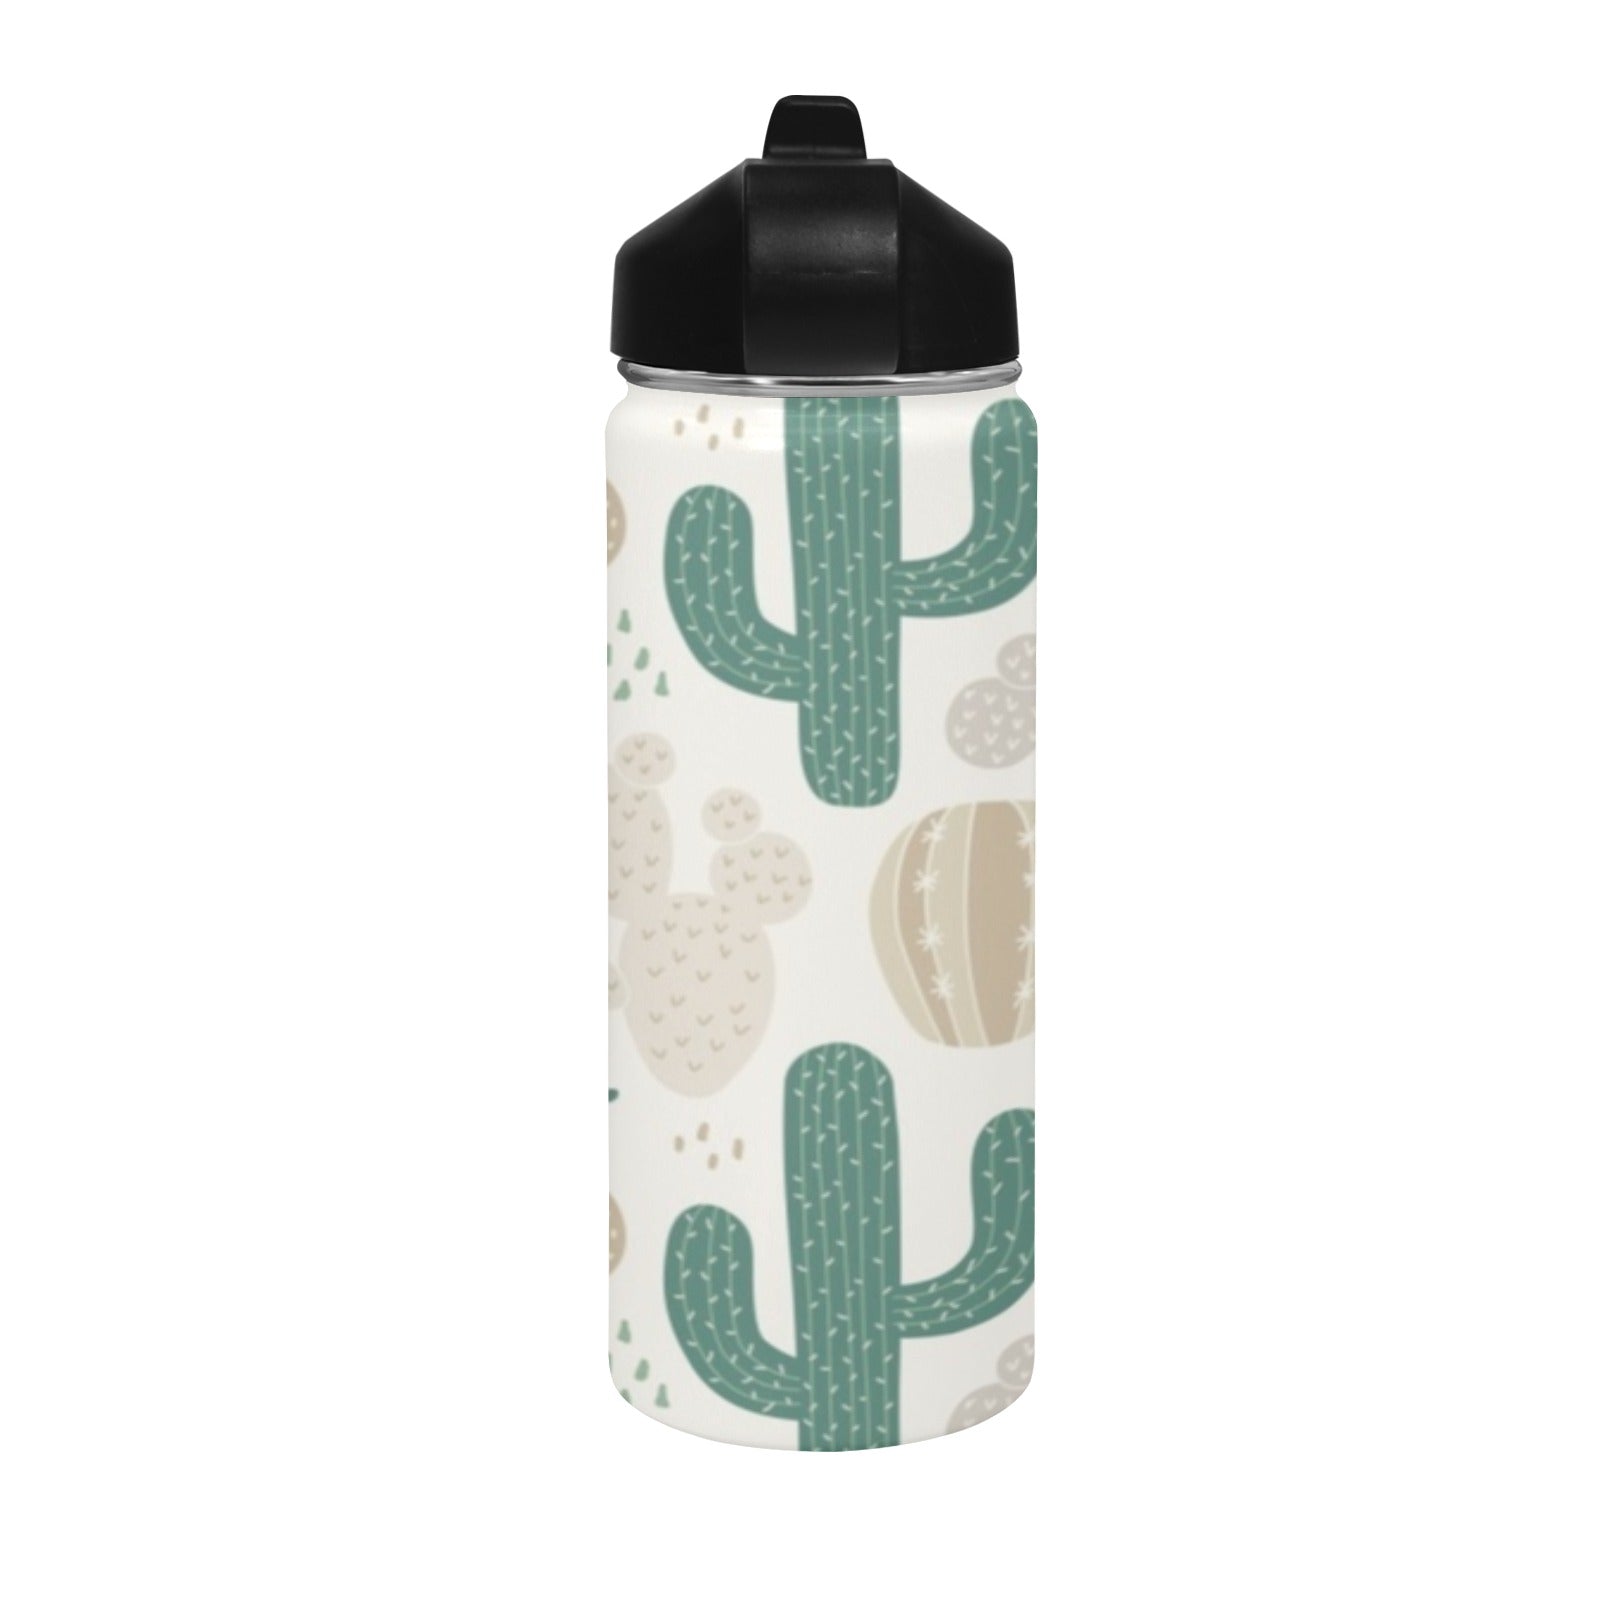 Cactus Insulated Water Bottle with Straw Lid (18 oz) Insulated Water Bottle with Straw Lid